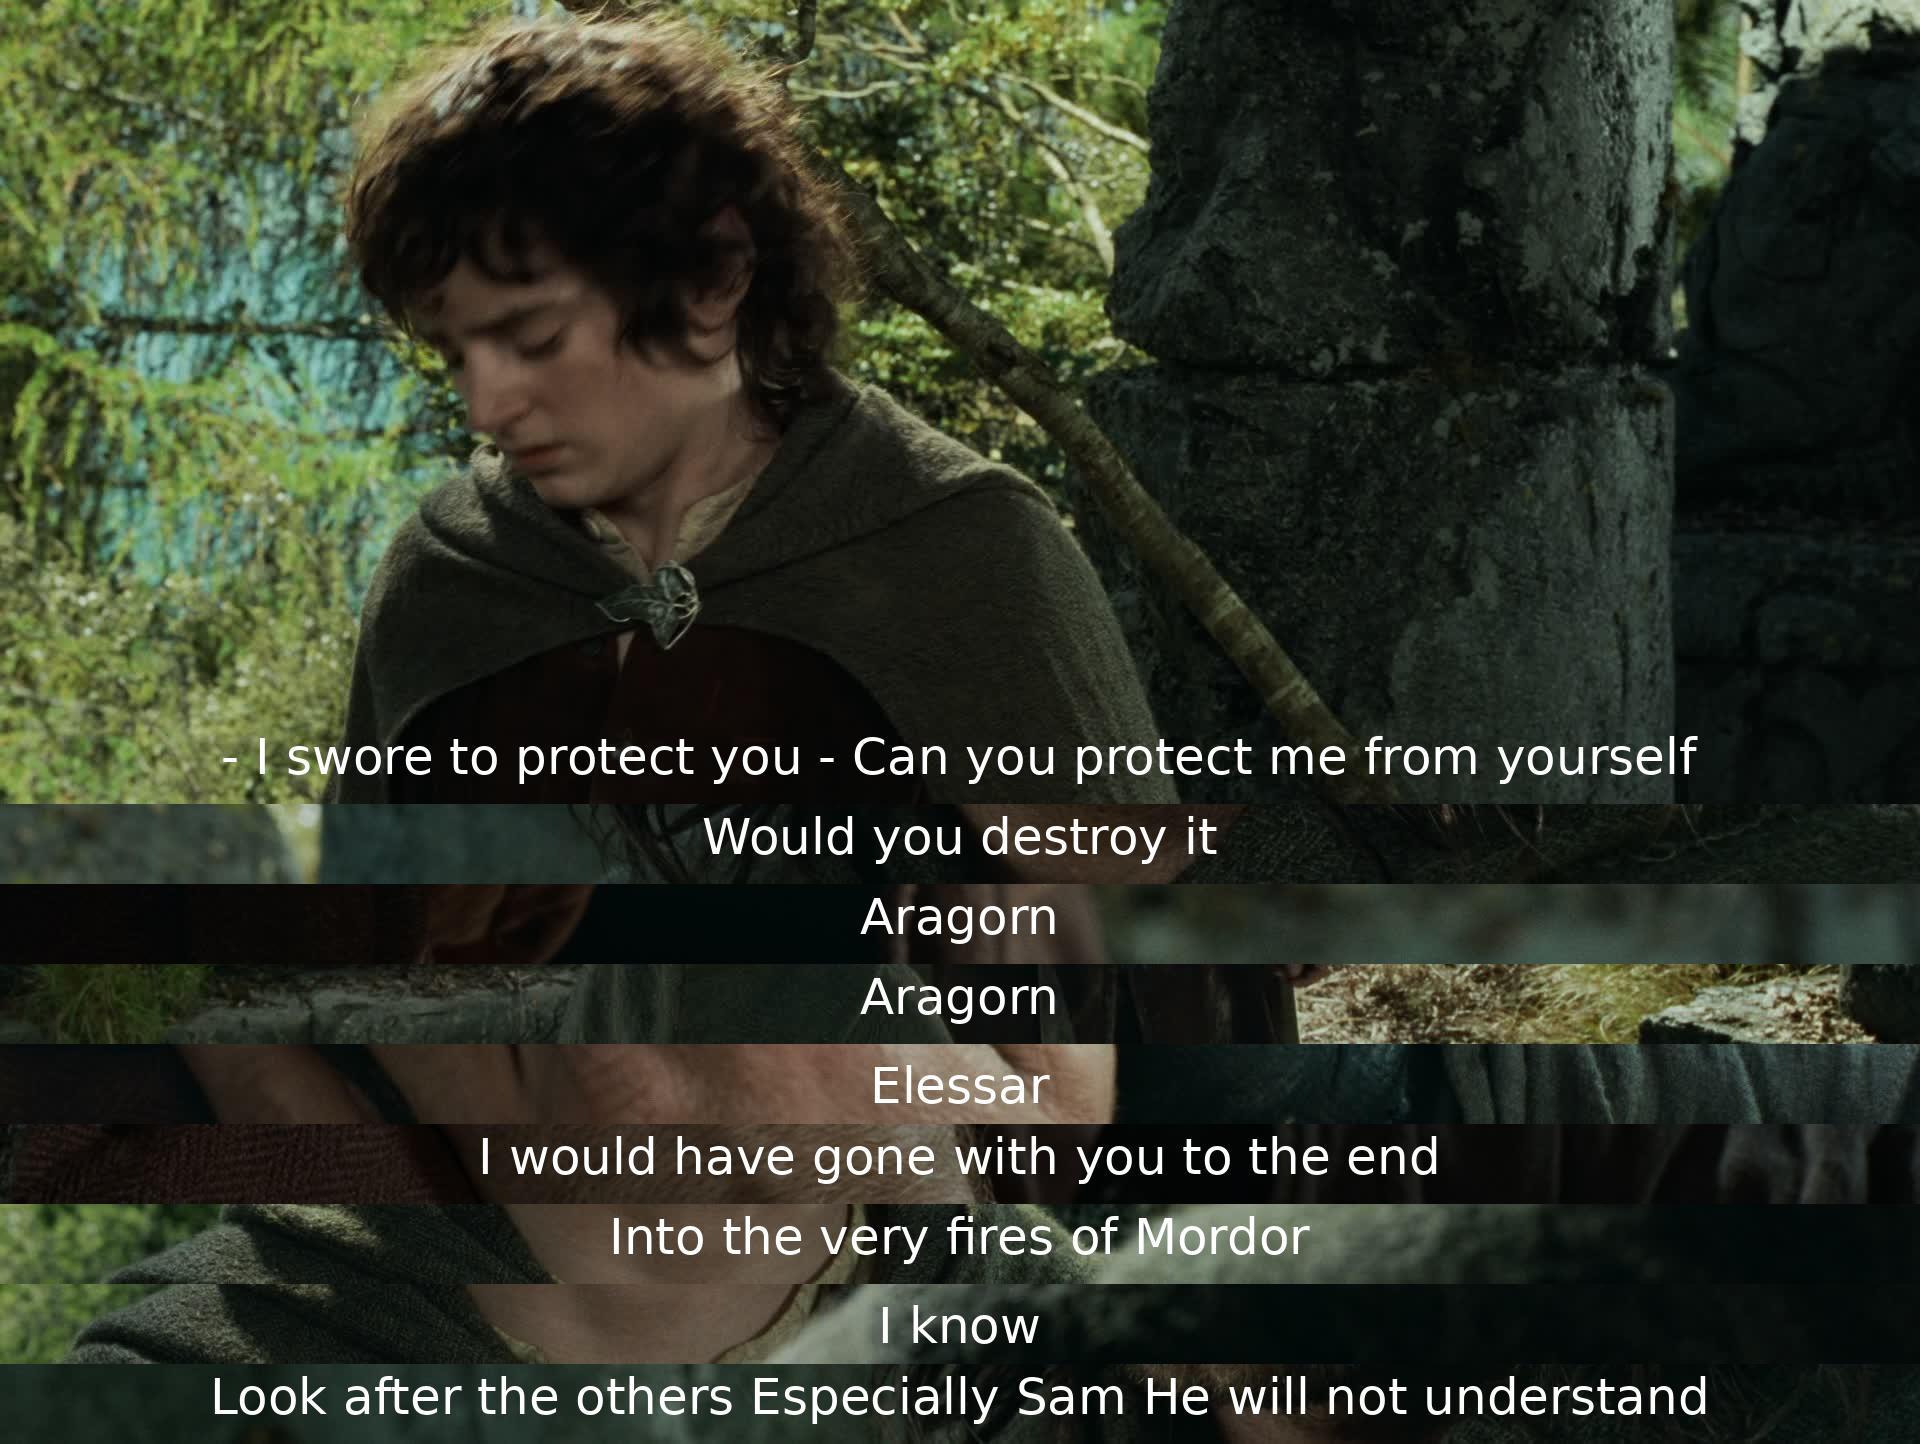 Aragorn agrees to take on the responsibility of safeguarding his companion, despite the risks involved. He acknowledges the importance of the mission and expresses his commitment to accompany and support until the journey's end, showing concern for the well-being of their fellow travelers, particularly Sam.